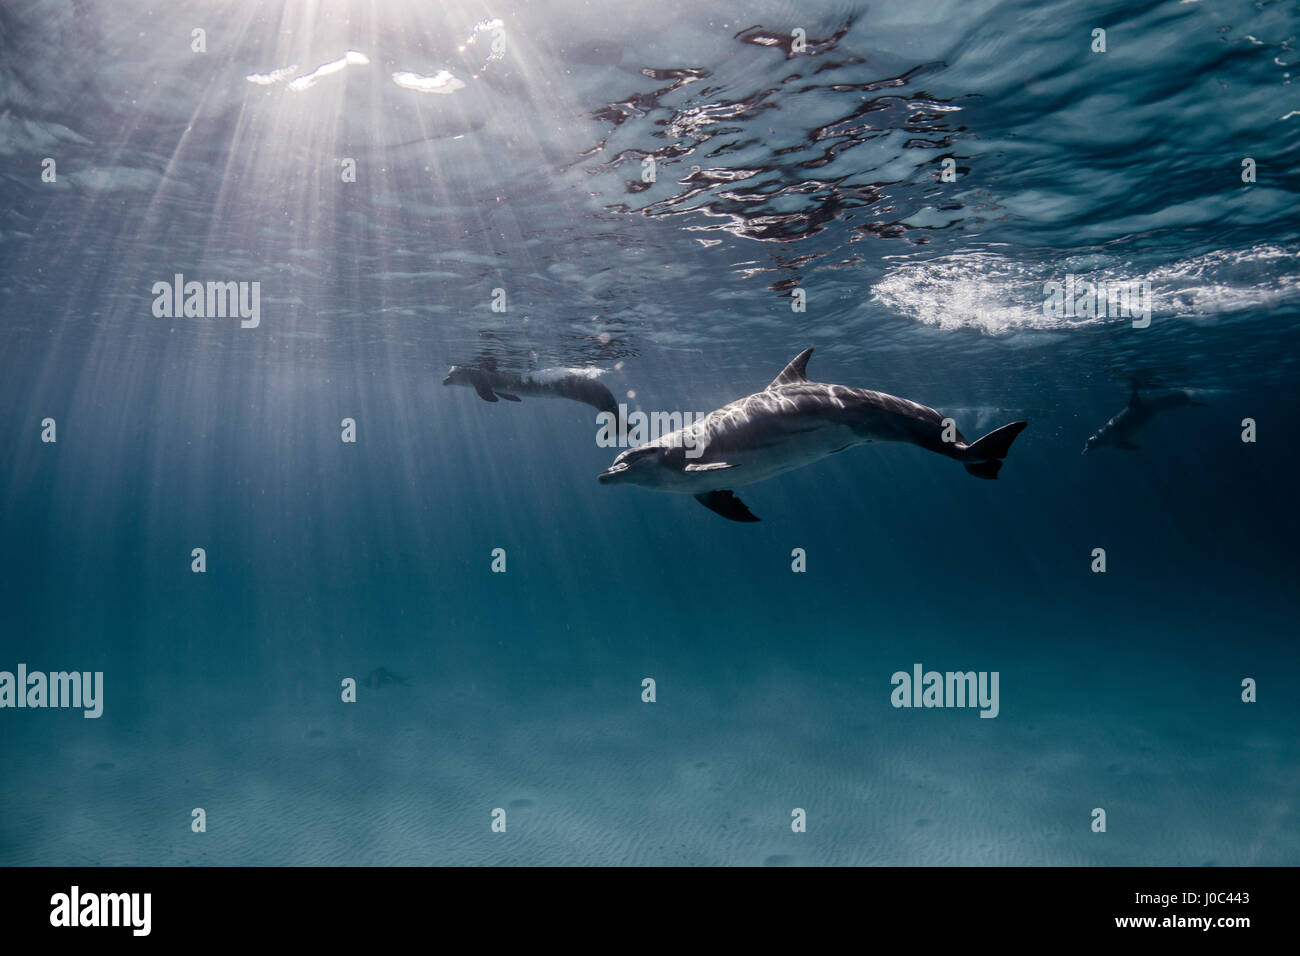 Underwater view of dolphins swimming near surface Stock Photo